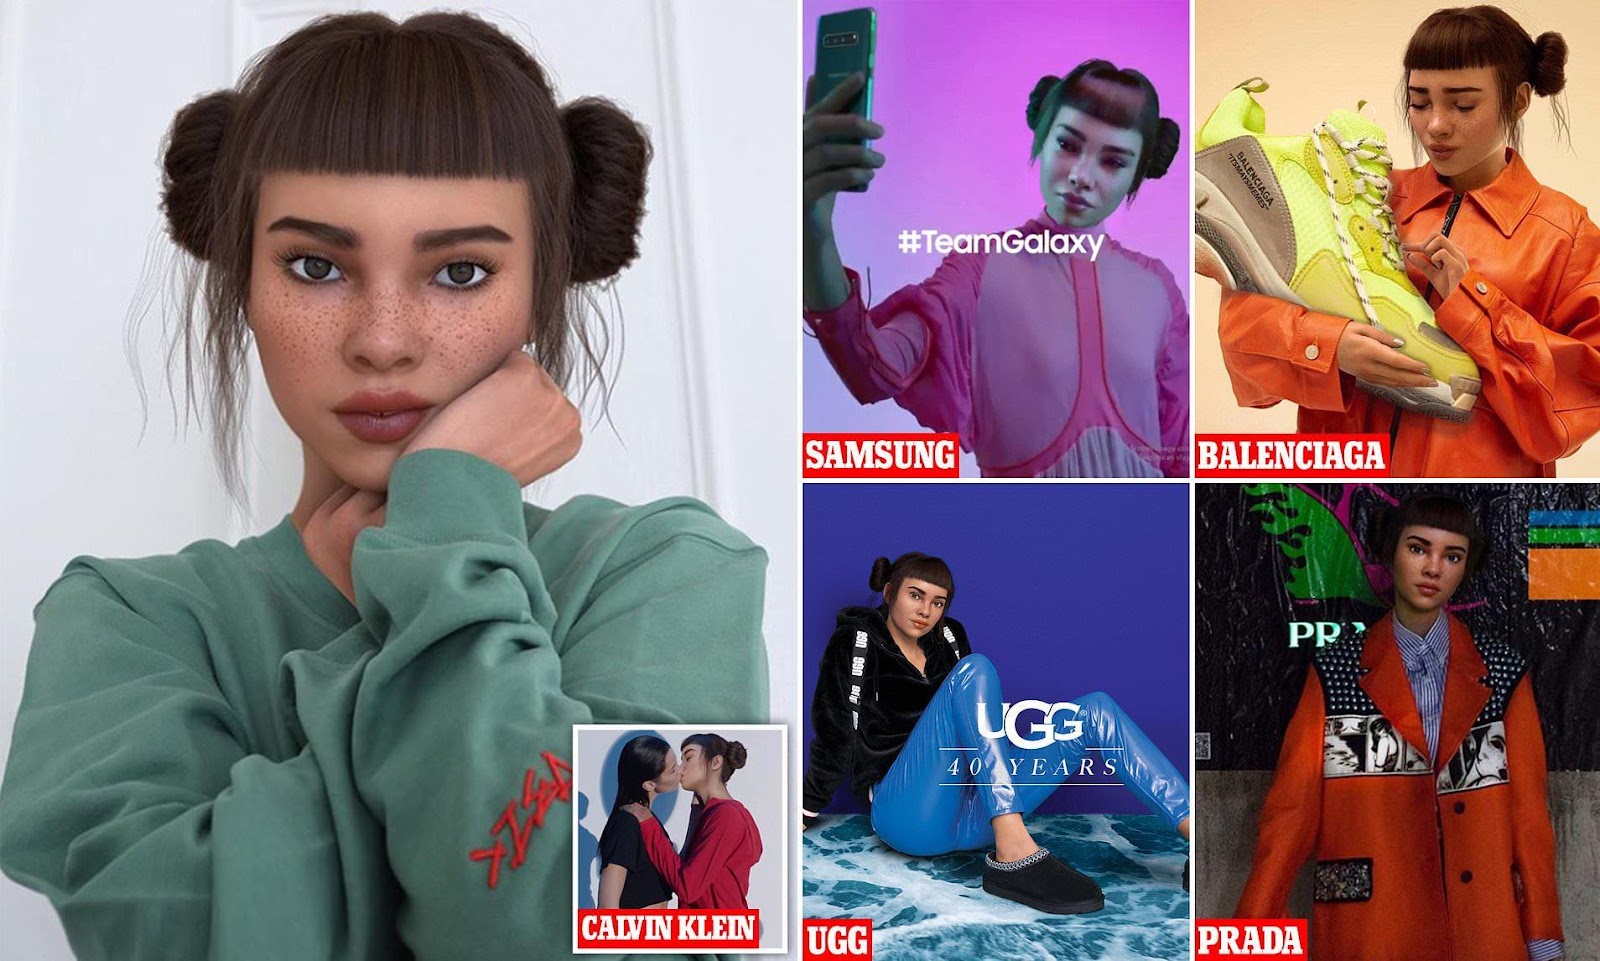 Top 10 CGI Influencers To Follow In 2021 | Hobo.Video